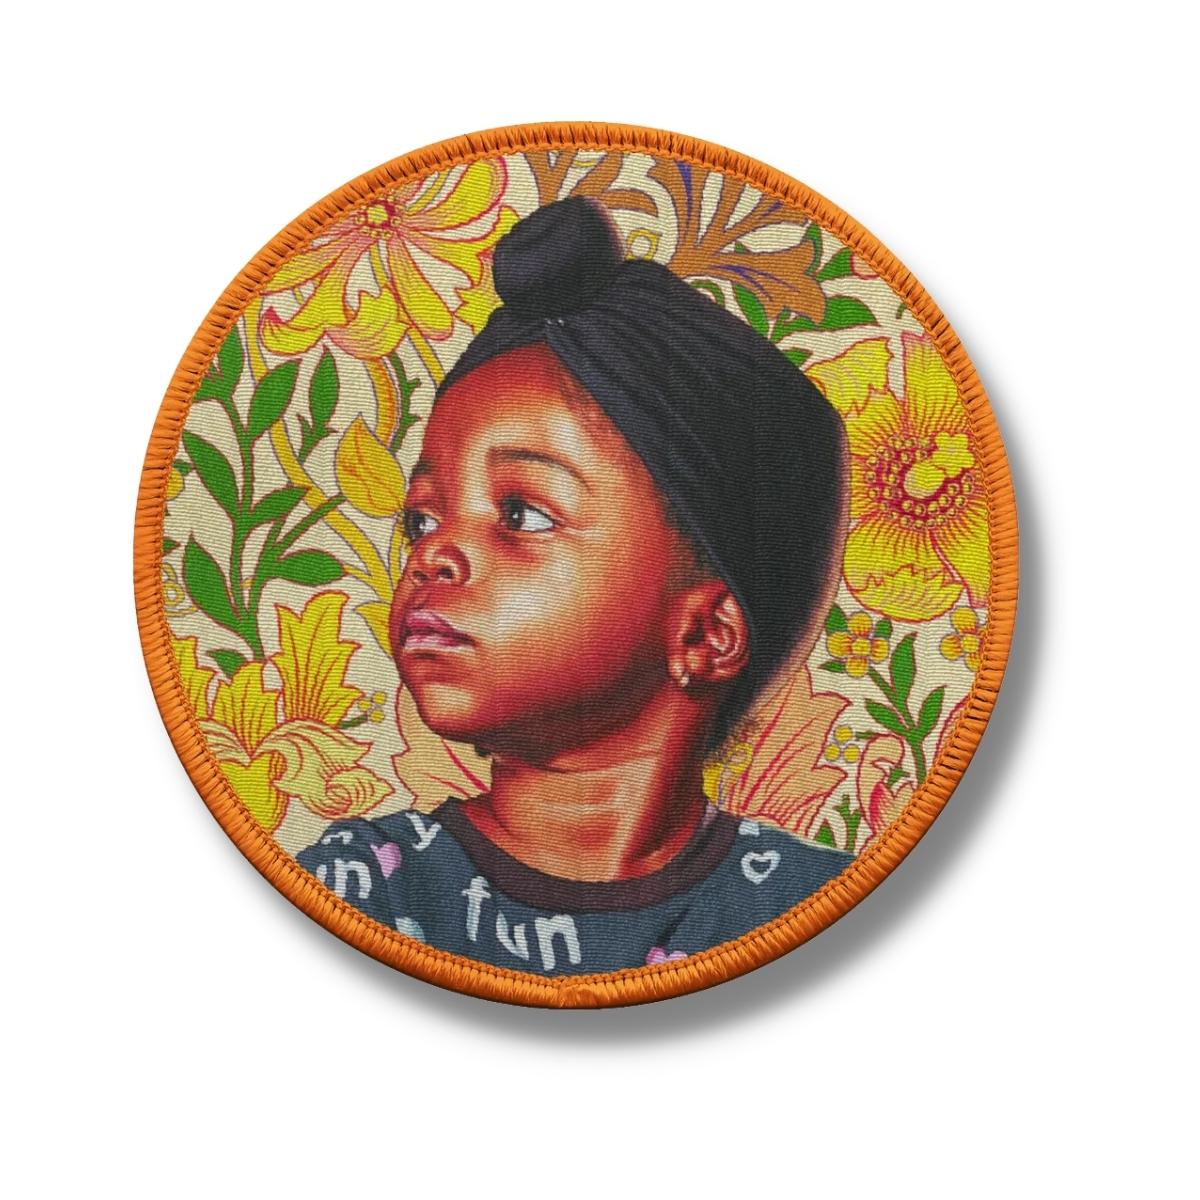 Kehinde Wiley - Yellow Wallpaper II patch